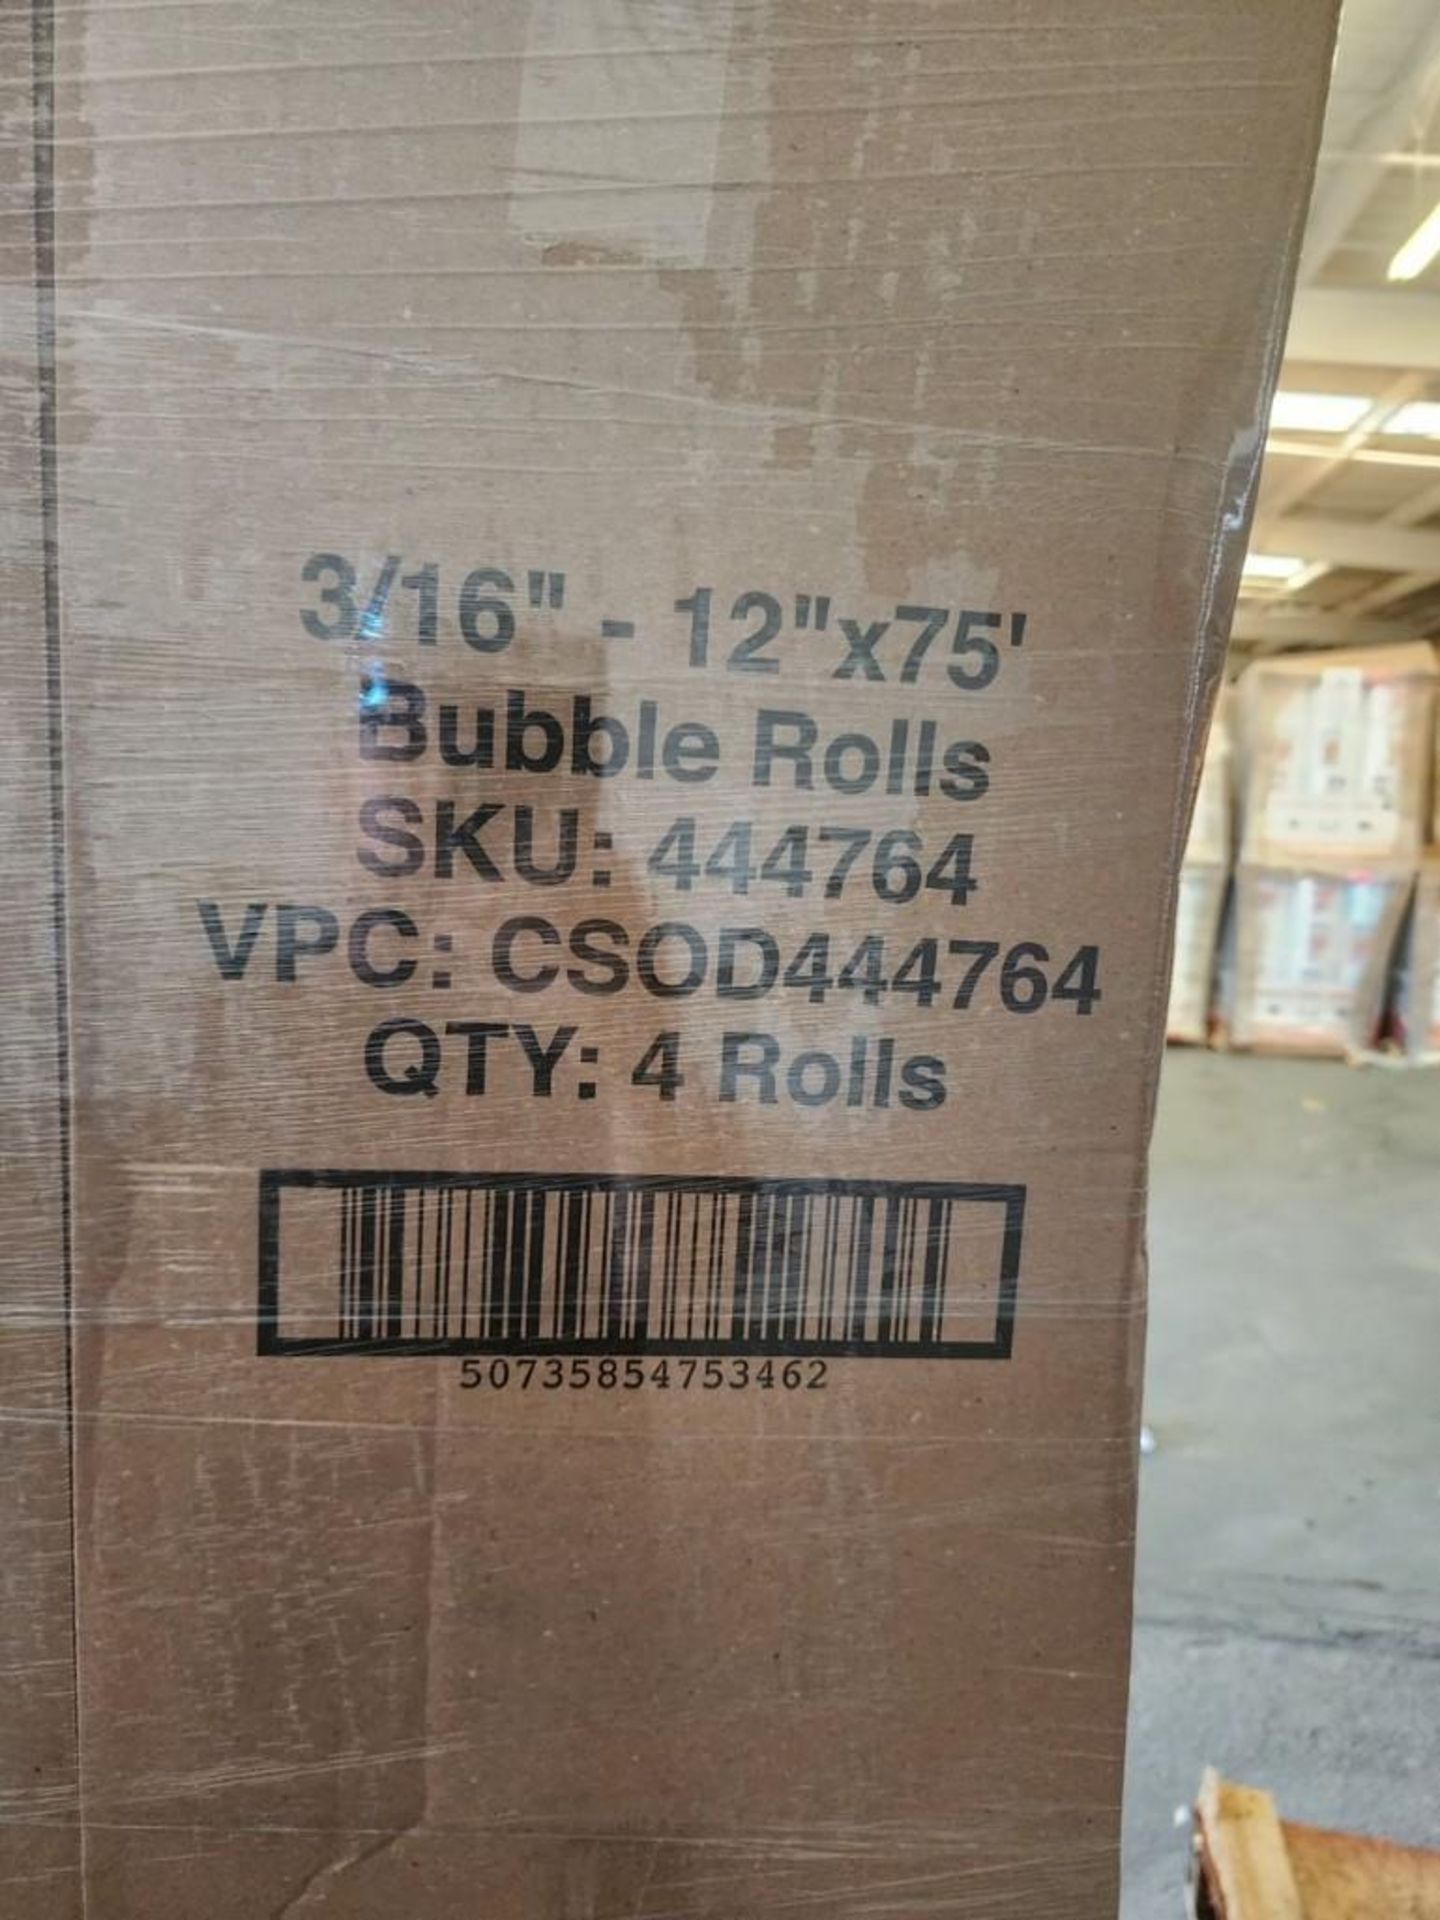 ONE PALLET OF NEW/UNUSED BUBBLE WRAP, 24 BOXES PER PALLET, 4 ROLLS PER BOX, 3/16" X 12" X 75' PER RO - Image 2 of 2